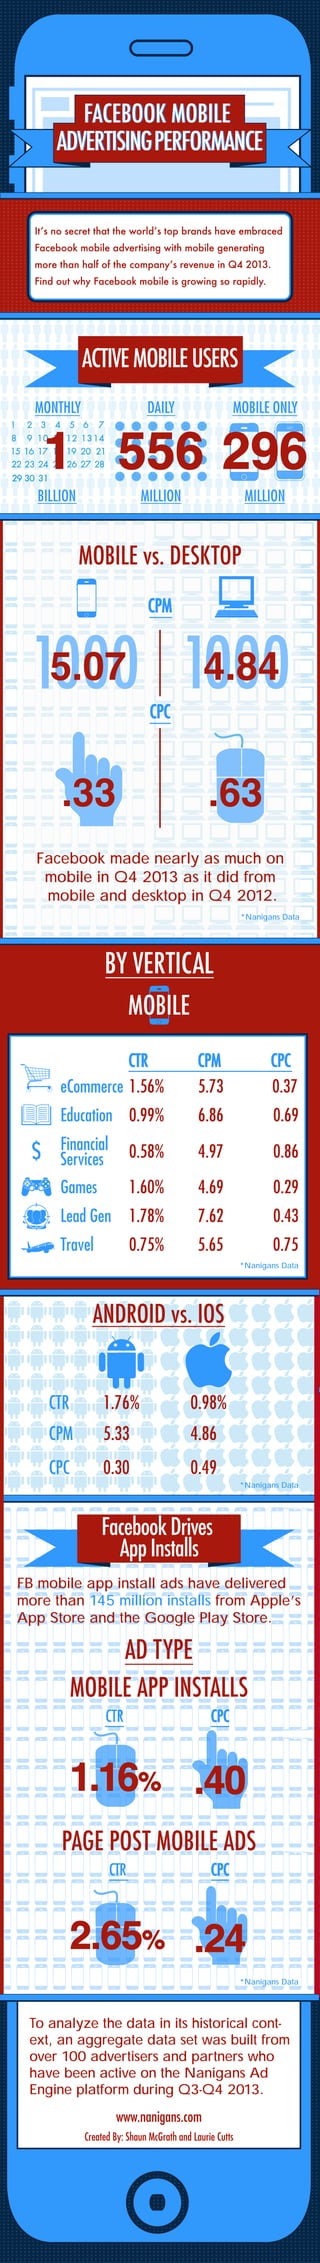 29 30 31
1
MONTHLY
BILLION
DAILY MOBILE ONLY
MILLION MILLION
556 296
ACTIVEMOBILEUSERS
Facebook made nearly as much on
mobile in Q4 2013 as it did from
mobile and desktop in Q4 2012.
*Nanigans Data
MOBILE vs. DESKTOP
BY VERTICAL
Itʼs no secret that the worldʼs top brands have embraced
Facebook mobile advertising with mobile generating
more than half of the companyʼs revenue in Q4 2013.
Find out why Facebook mobile is growing so rapidly.
CTR CPM CPC
1.56% 5.73 0.37
0.99% 6.86 0.69
0.58% 4.97 0.86
1.60% 4.69 0.29
1.78% 7.62 0.43
0.75% 5.65 0.75
eCommerce
Education
Financial
Services
Games
Lead Gen
Travel
$
MOBILE
CPM
CPC
CTR
www.nanigans.com
Created By: Shaun McGrath and Laurie Cutts
CPC
.33 .63
FB mobile app install ads have delivered
more than 145 million installs from Apple’s
App Store and the Google Play Store.
Facebook Drives
App Installs
CPM
100010005.07 100010004.84
ANDROID vs. IOS
0.30 0.49
5.33 4.86
1.76% 0.98%
MOBILE APP INSTALLS
AD TYPE
PAGE POST MOBILE ADS
.40
CPC
1.16%
CTR
.24
CPC
2.65%
CTR
FACEBOOK MOBILE
ADVERTISINGPERFORMANCE
FACEBOOK MOBILE
ADVERTISINGPERFORMANCE
To analyze the data in its historical cont-
ext, an aggregate data set was built from
over 100 advertisers and partners who
have been active on the Nanigans Ad
Engine platform during Q3-Q4 2013.
*Nanigans Data
*Nanigans Data
*Nanigans Data
BY VERTICAL
CTR CPM CPC
1.56% 5.73 0.37
0.99% 6.86 0.69
0.58% 4.97 0.86
1.60% 4.69 0.29
1.78% 7.62 0.43
0.75% 5.65 0.75
eCommerce
Education
Financial
Services
Games
Lead Gen
Travel
$
MOBILE
CPM
CPC
CTR
www.nanigans.com
Created By: Shaun McGrath and Laurie Cutts
FB mobile app install ads have delivered
more than 145 million installs from Apple’s
App Store and the Google Play Store.
Facebook Drives
App Installs
ANDROID vs. IOS
0.30 0.49
5.33 4.86
1.76% 0.98%
MOBILE APP INSTALLS
AD TYPE
PAGE POST MOBILE ADS
.40
CPC
1.16%
CTR
.24
CPC
2.65%
CTR
To analyze the data in its historical cont-
ext, an aggregate data set was built from
over 100 advertisers and partners who
have been active on the Nanigans Ad
Engine platform during Q3-Q4 2013.
*Nanigans Data
*Nanigans Data
*Nanigans Data
 